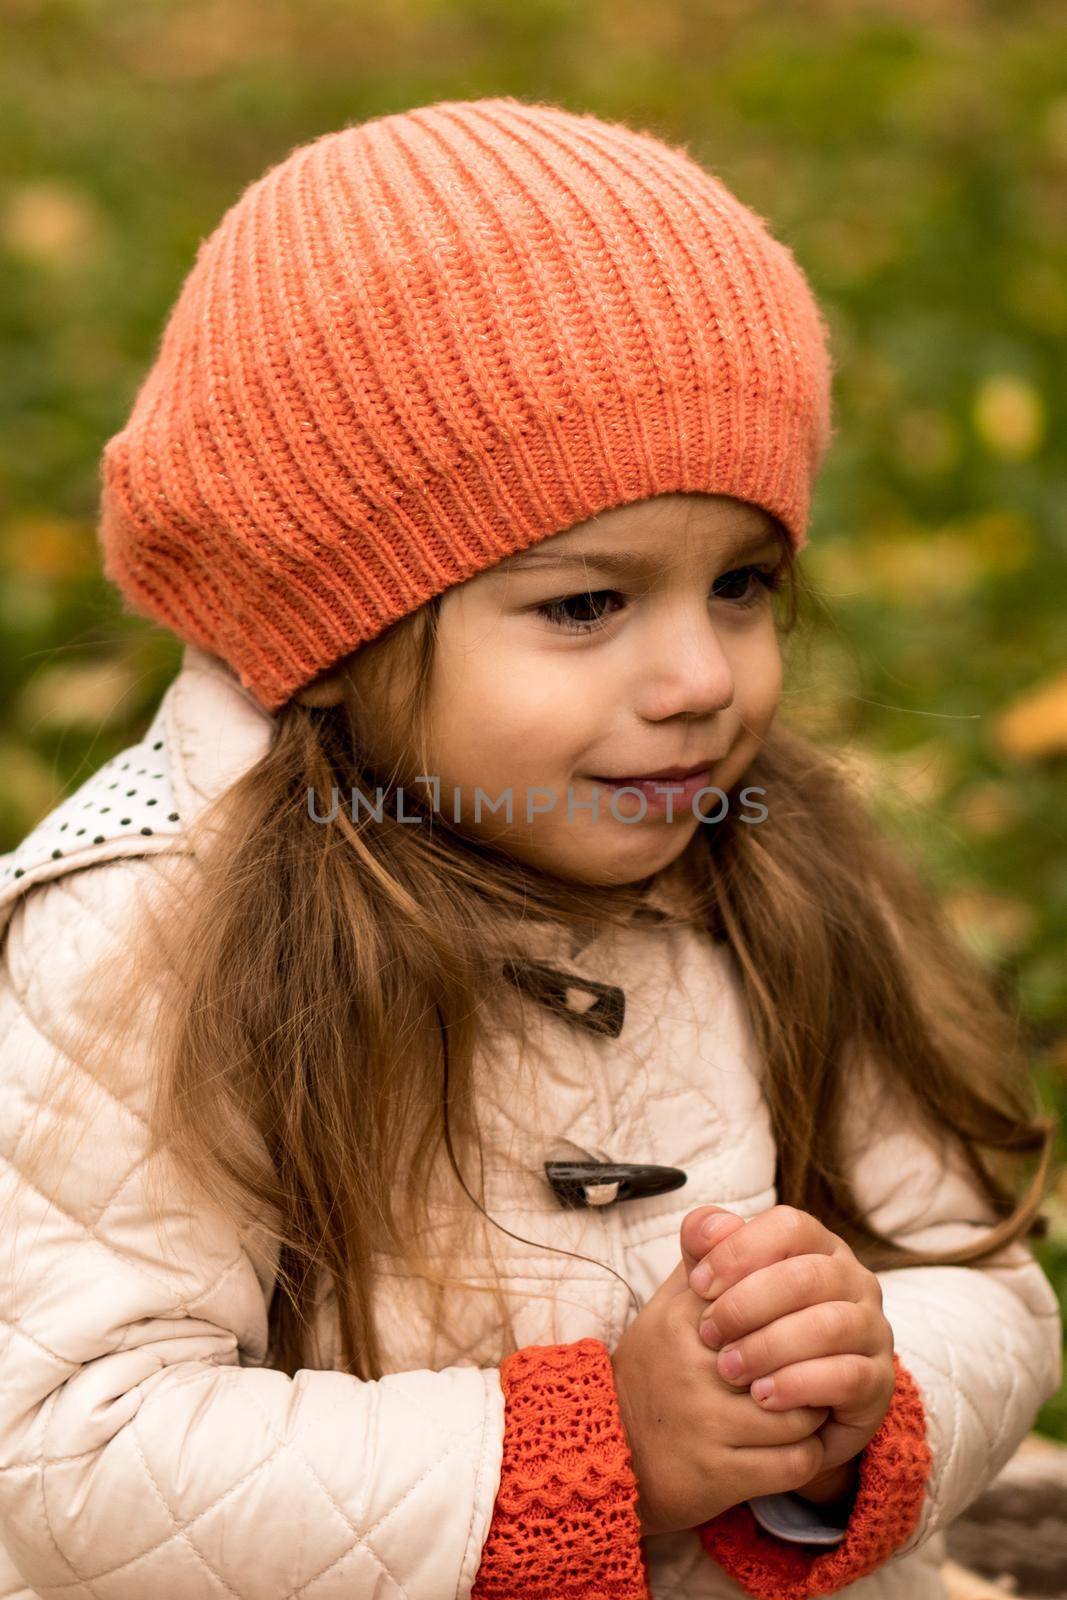 Portrait Little Preschool Minor Girl In Orange Beret On Yellow Fallen Leaves in Basket Wrapped In Blanket Dreamily Looks Away. Cold Weather In Fall Park. Childhood, Family, Motherhood, Autumn Concept by mytrykau